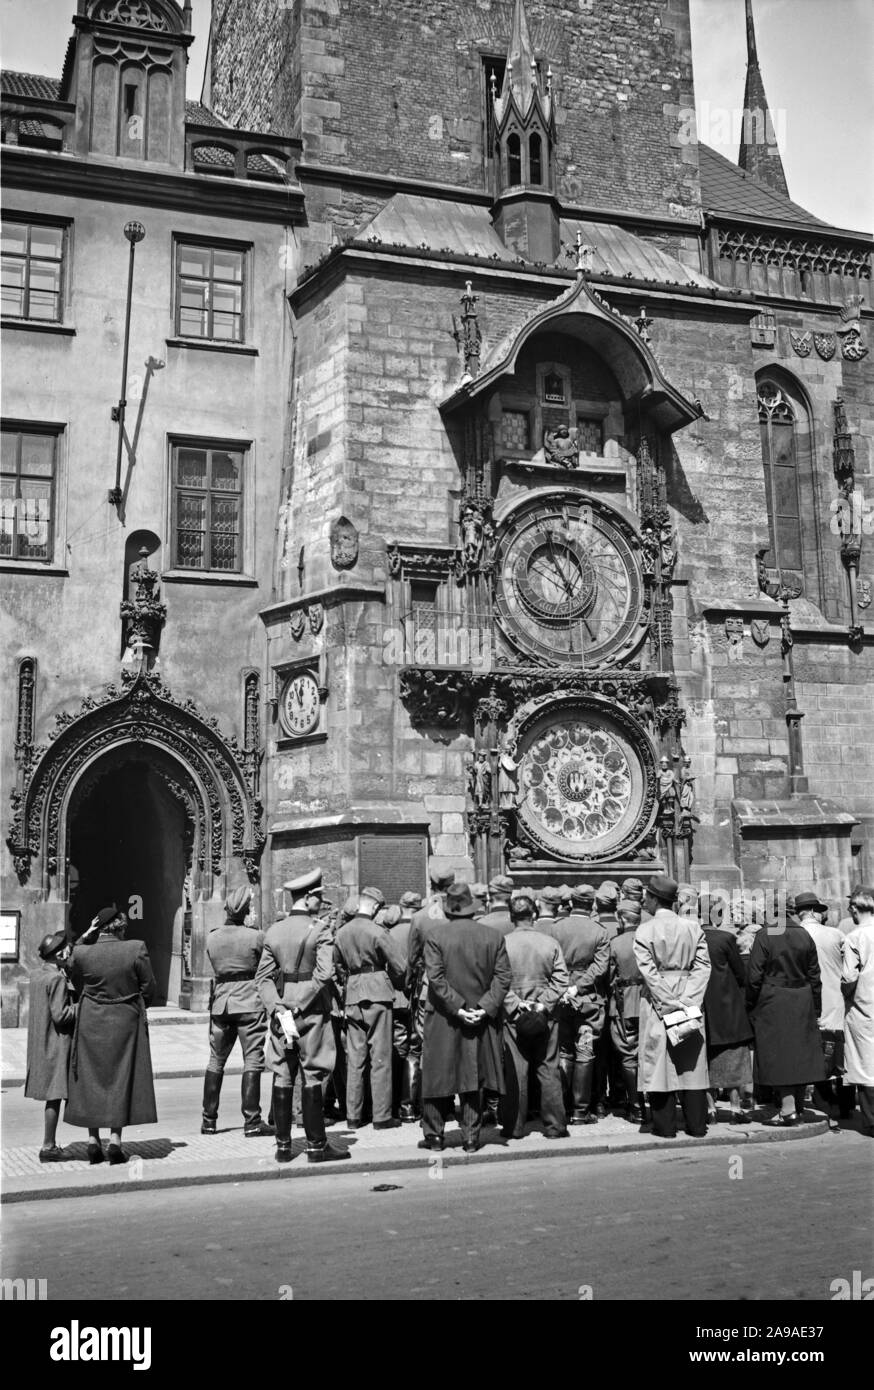 Original caption: German soldiers admire the clock at the town hall in Prague, 1930s Stock Photo